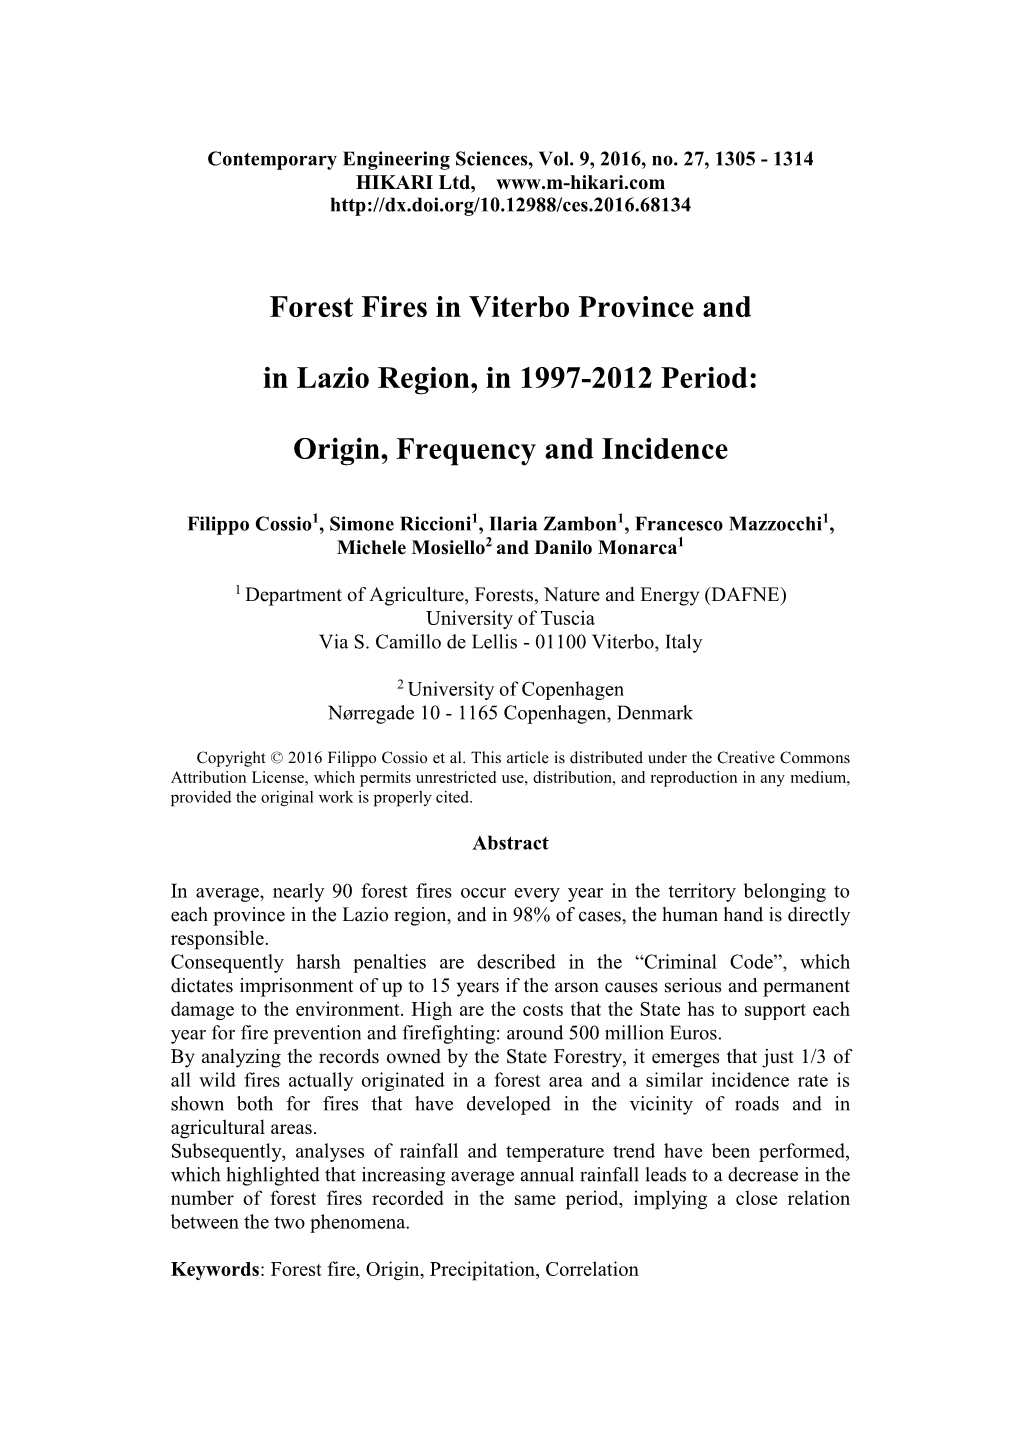 Forest Fires in Viterbo Province and in Lazio Region, in 1997-2012 Period: Origin, Frequency and Incidence